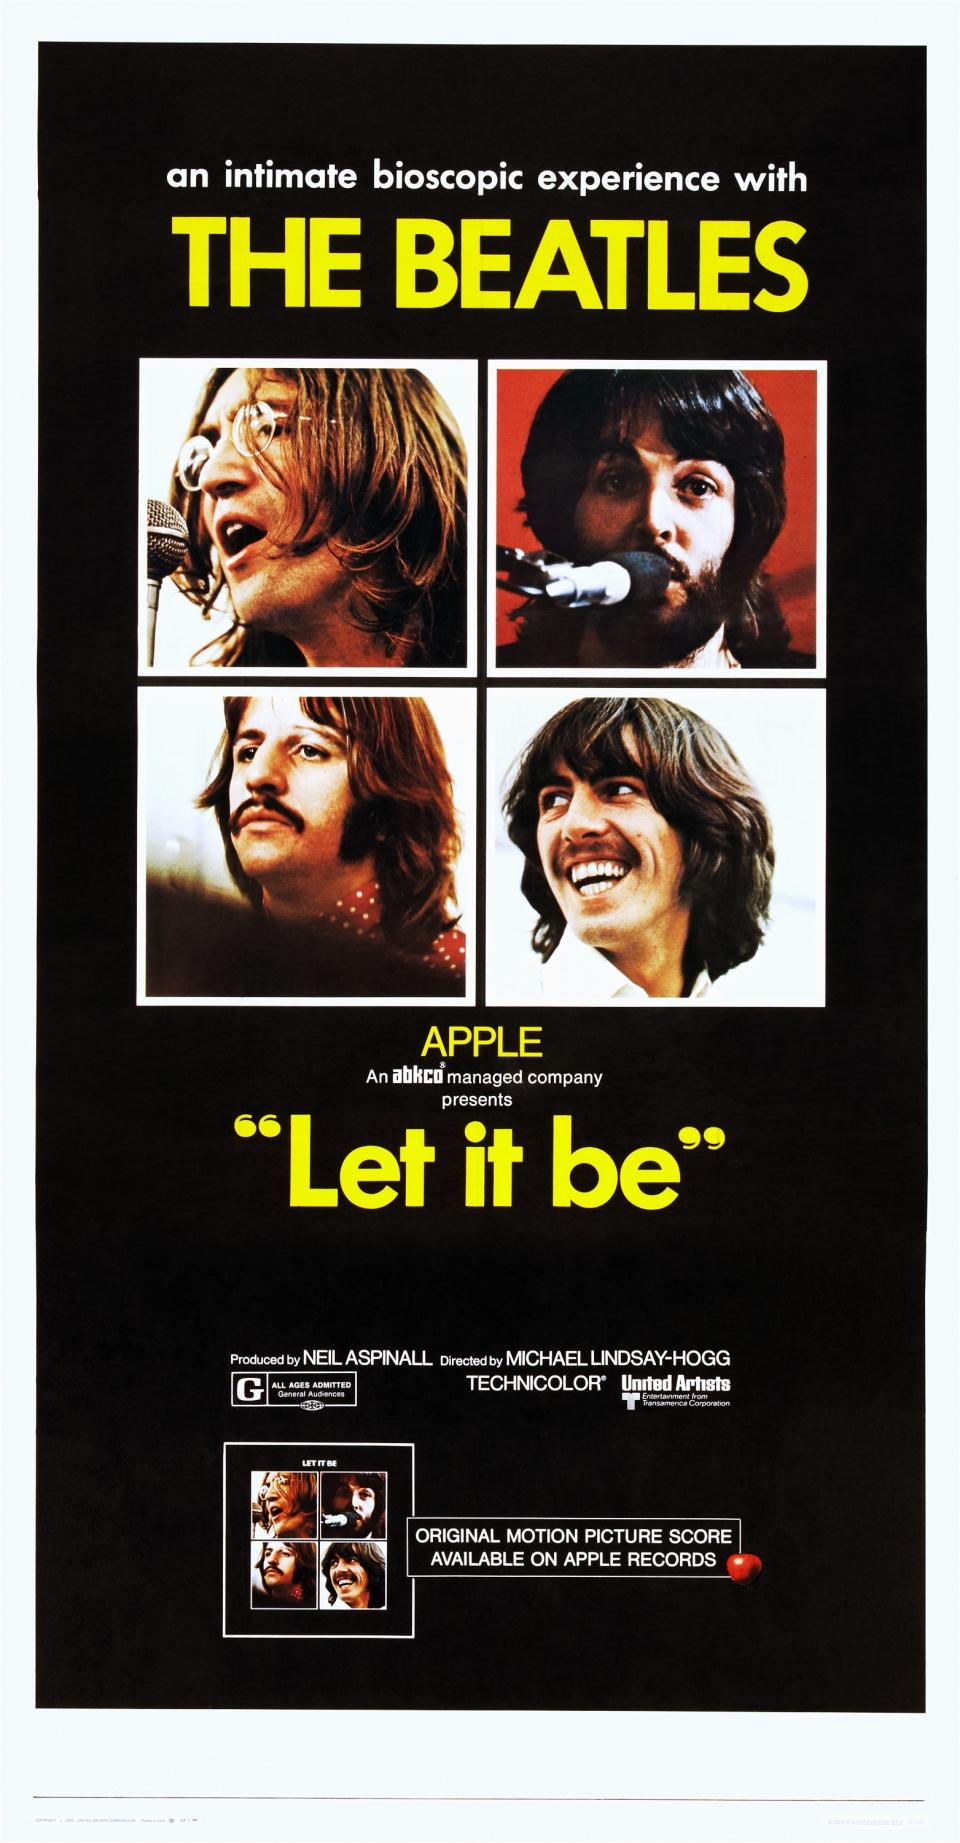 The Let It Be poster released in the U.S. in 1970.